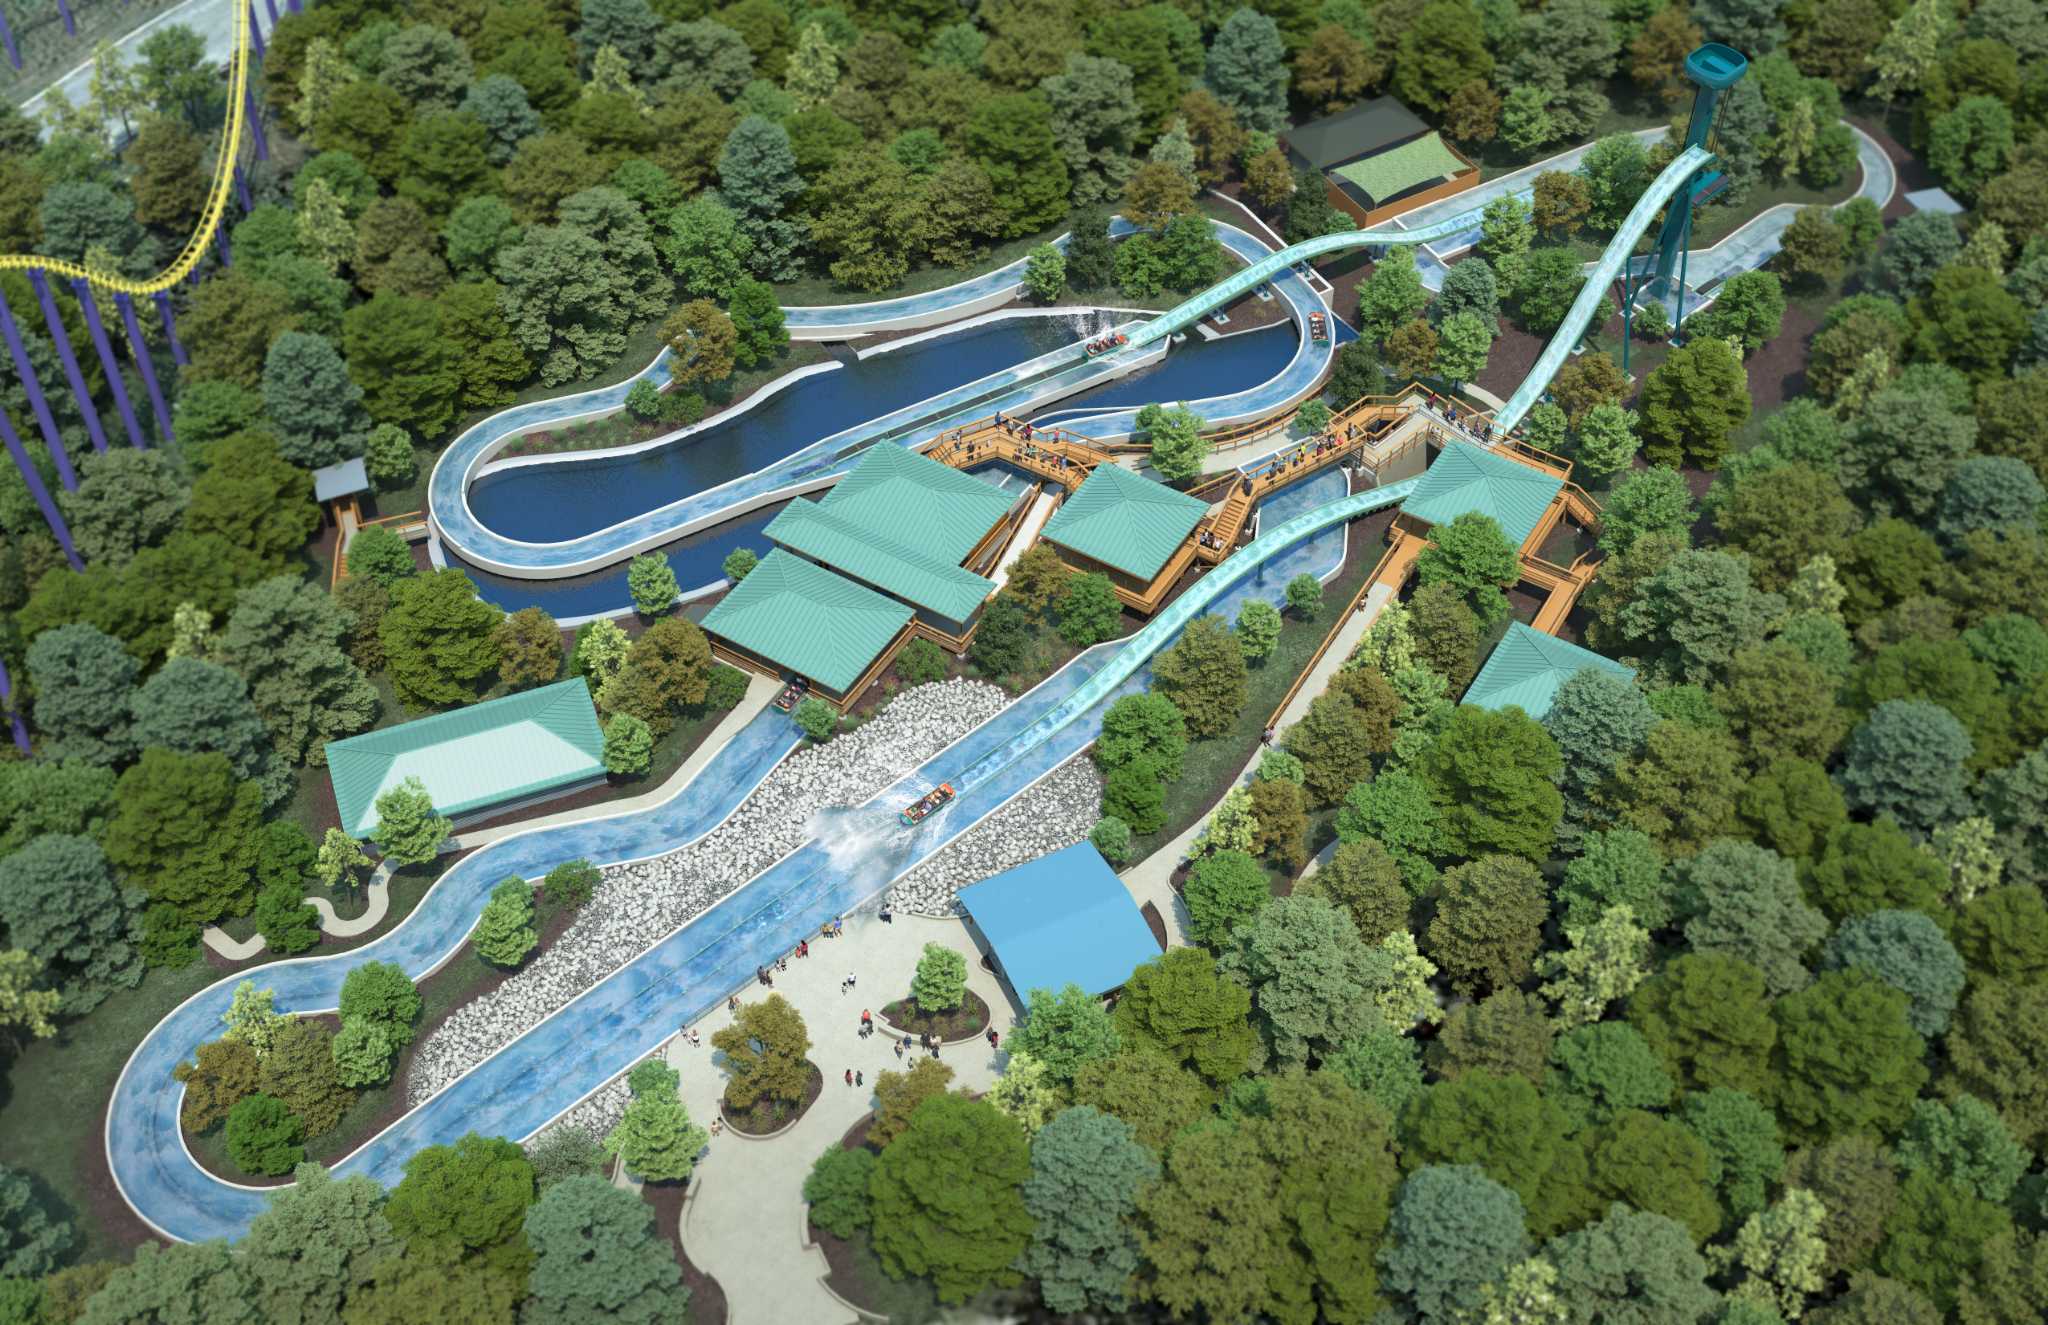 SeaWorld San Antonio debuts massive wooden roller coaster and  'first-of-its-kind' water slide